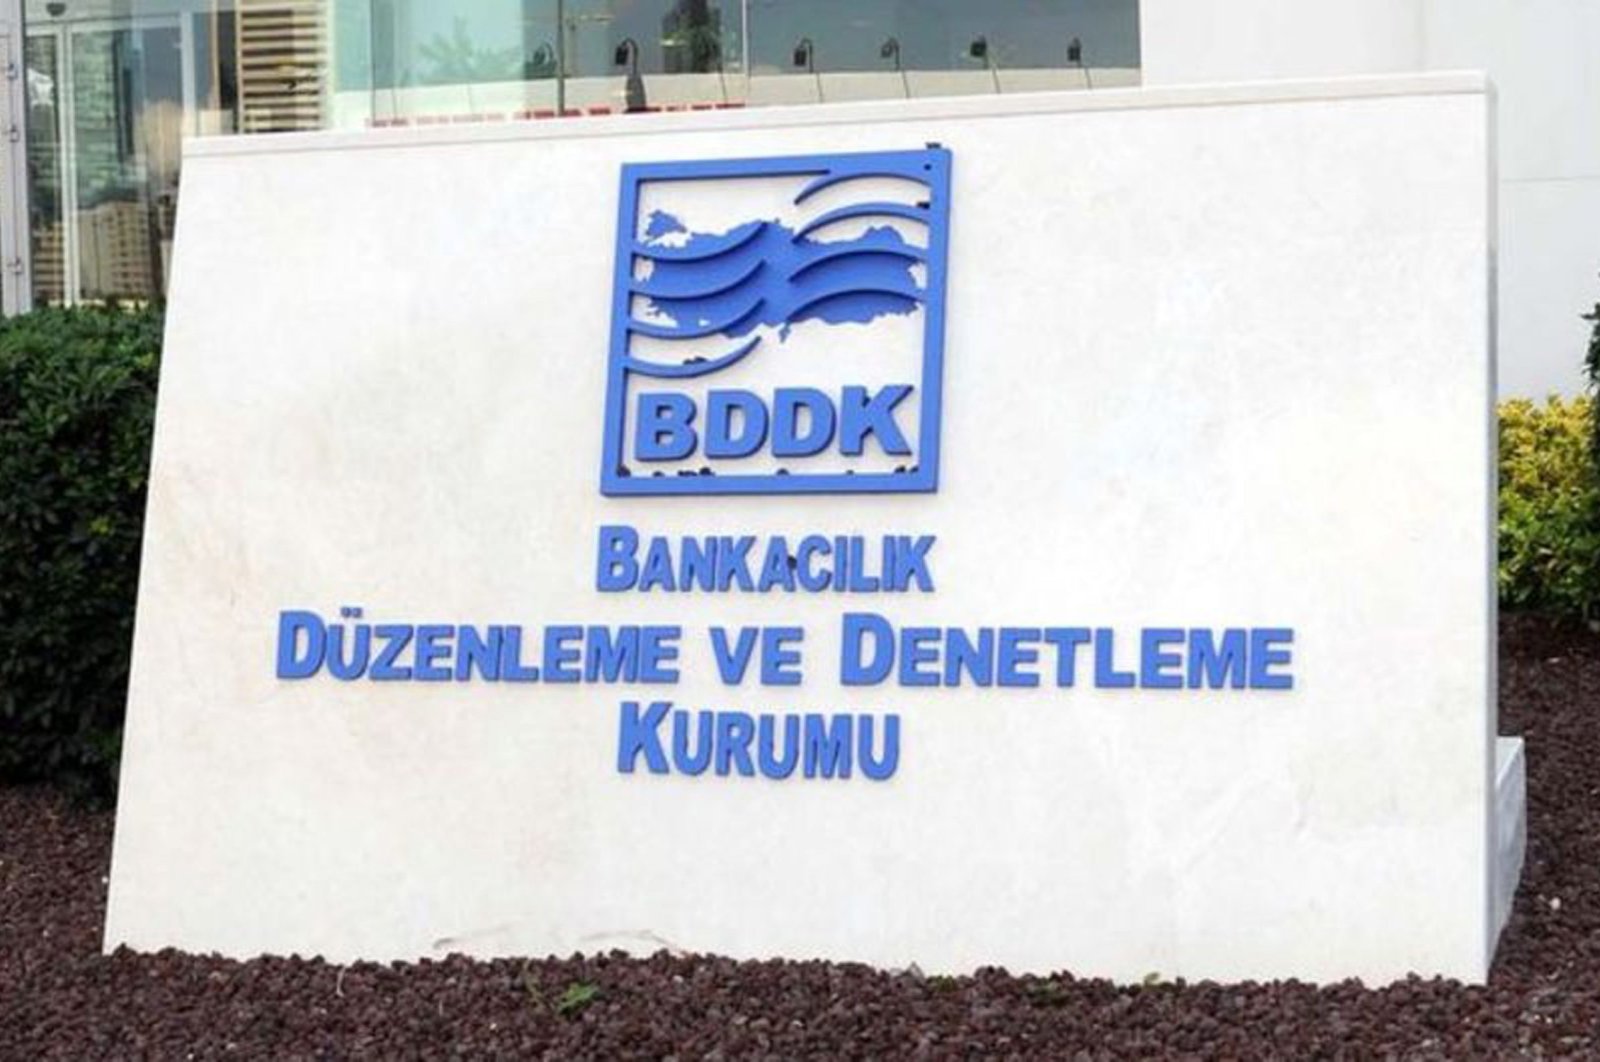 The Banking Regulation and Supervision Agency's (BDDK) logo is seen in front of its headquarters in Istanbul, Turkey, in this undated photo.